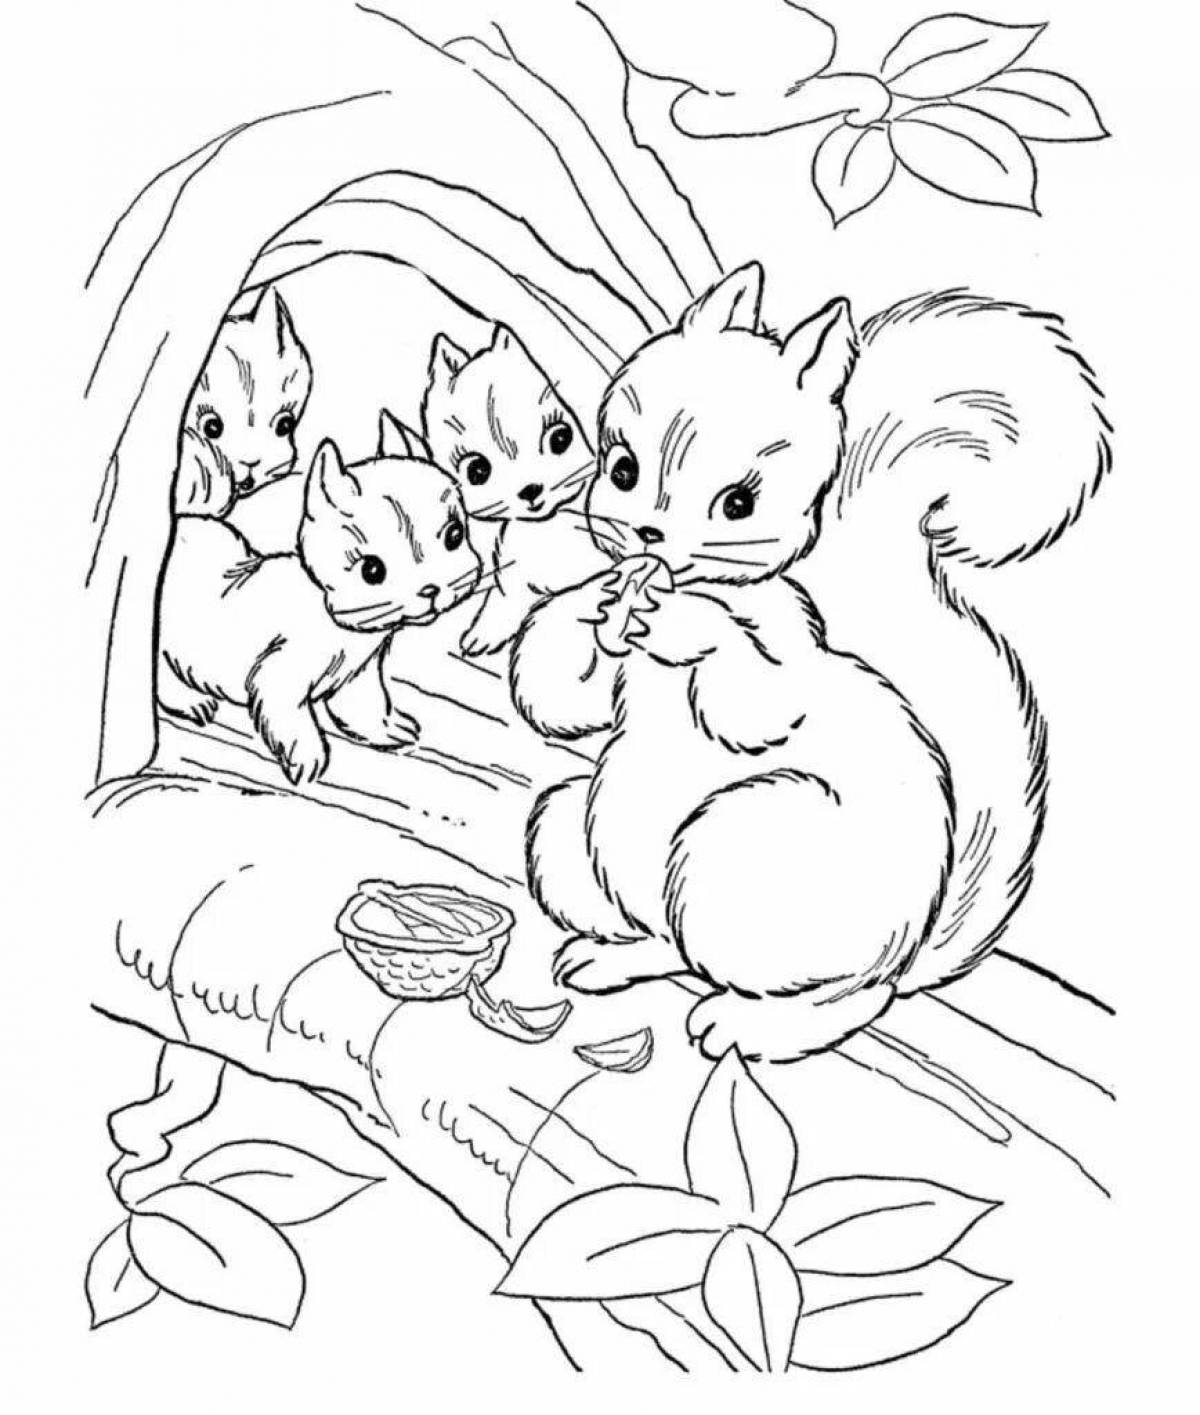 Fluffy animal coloring pages for kids